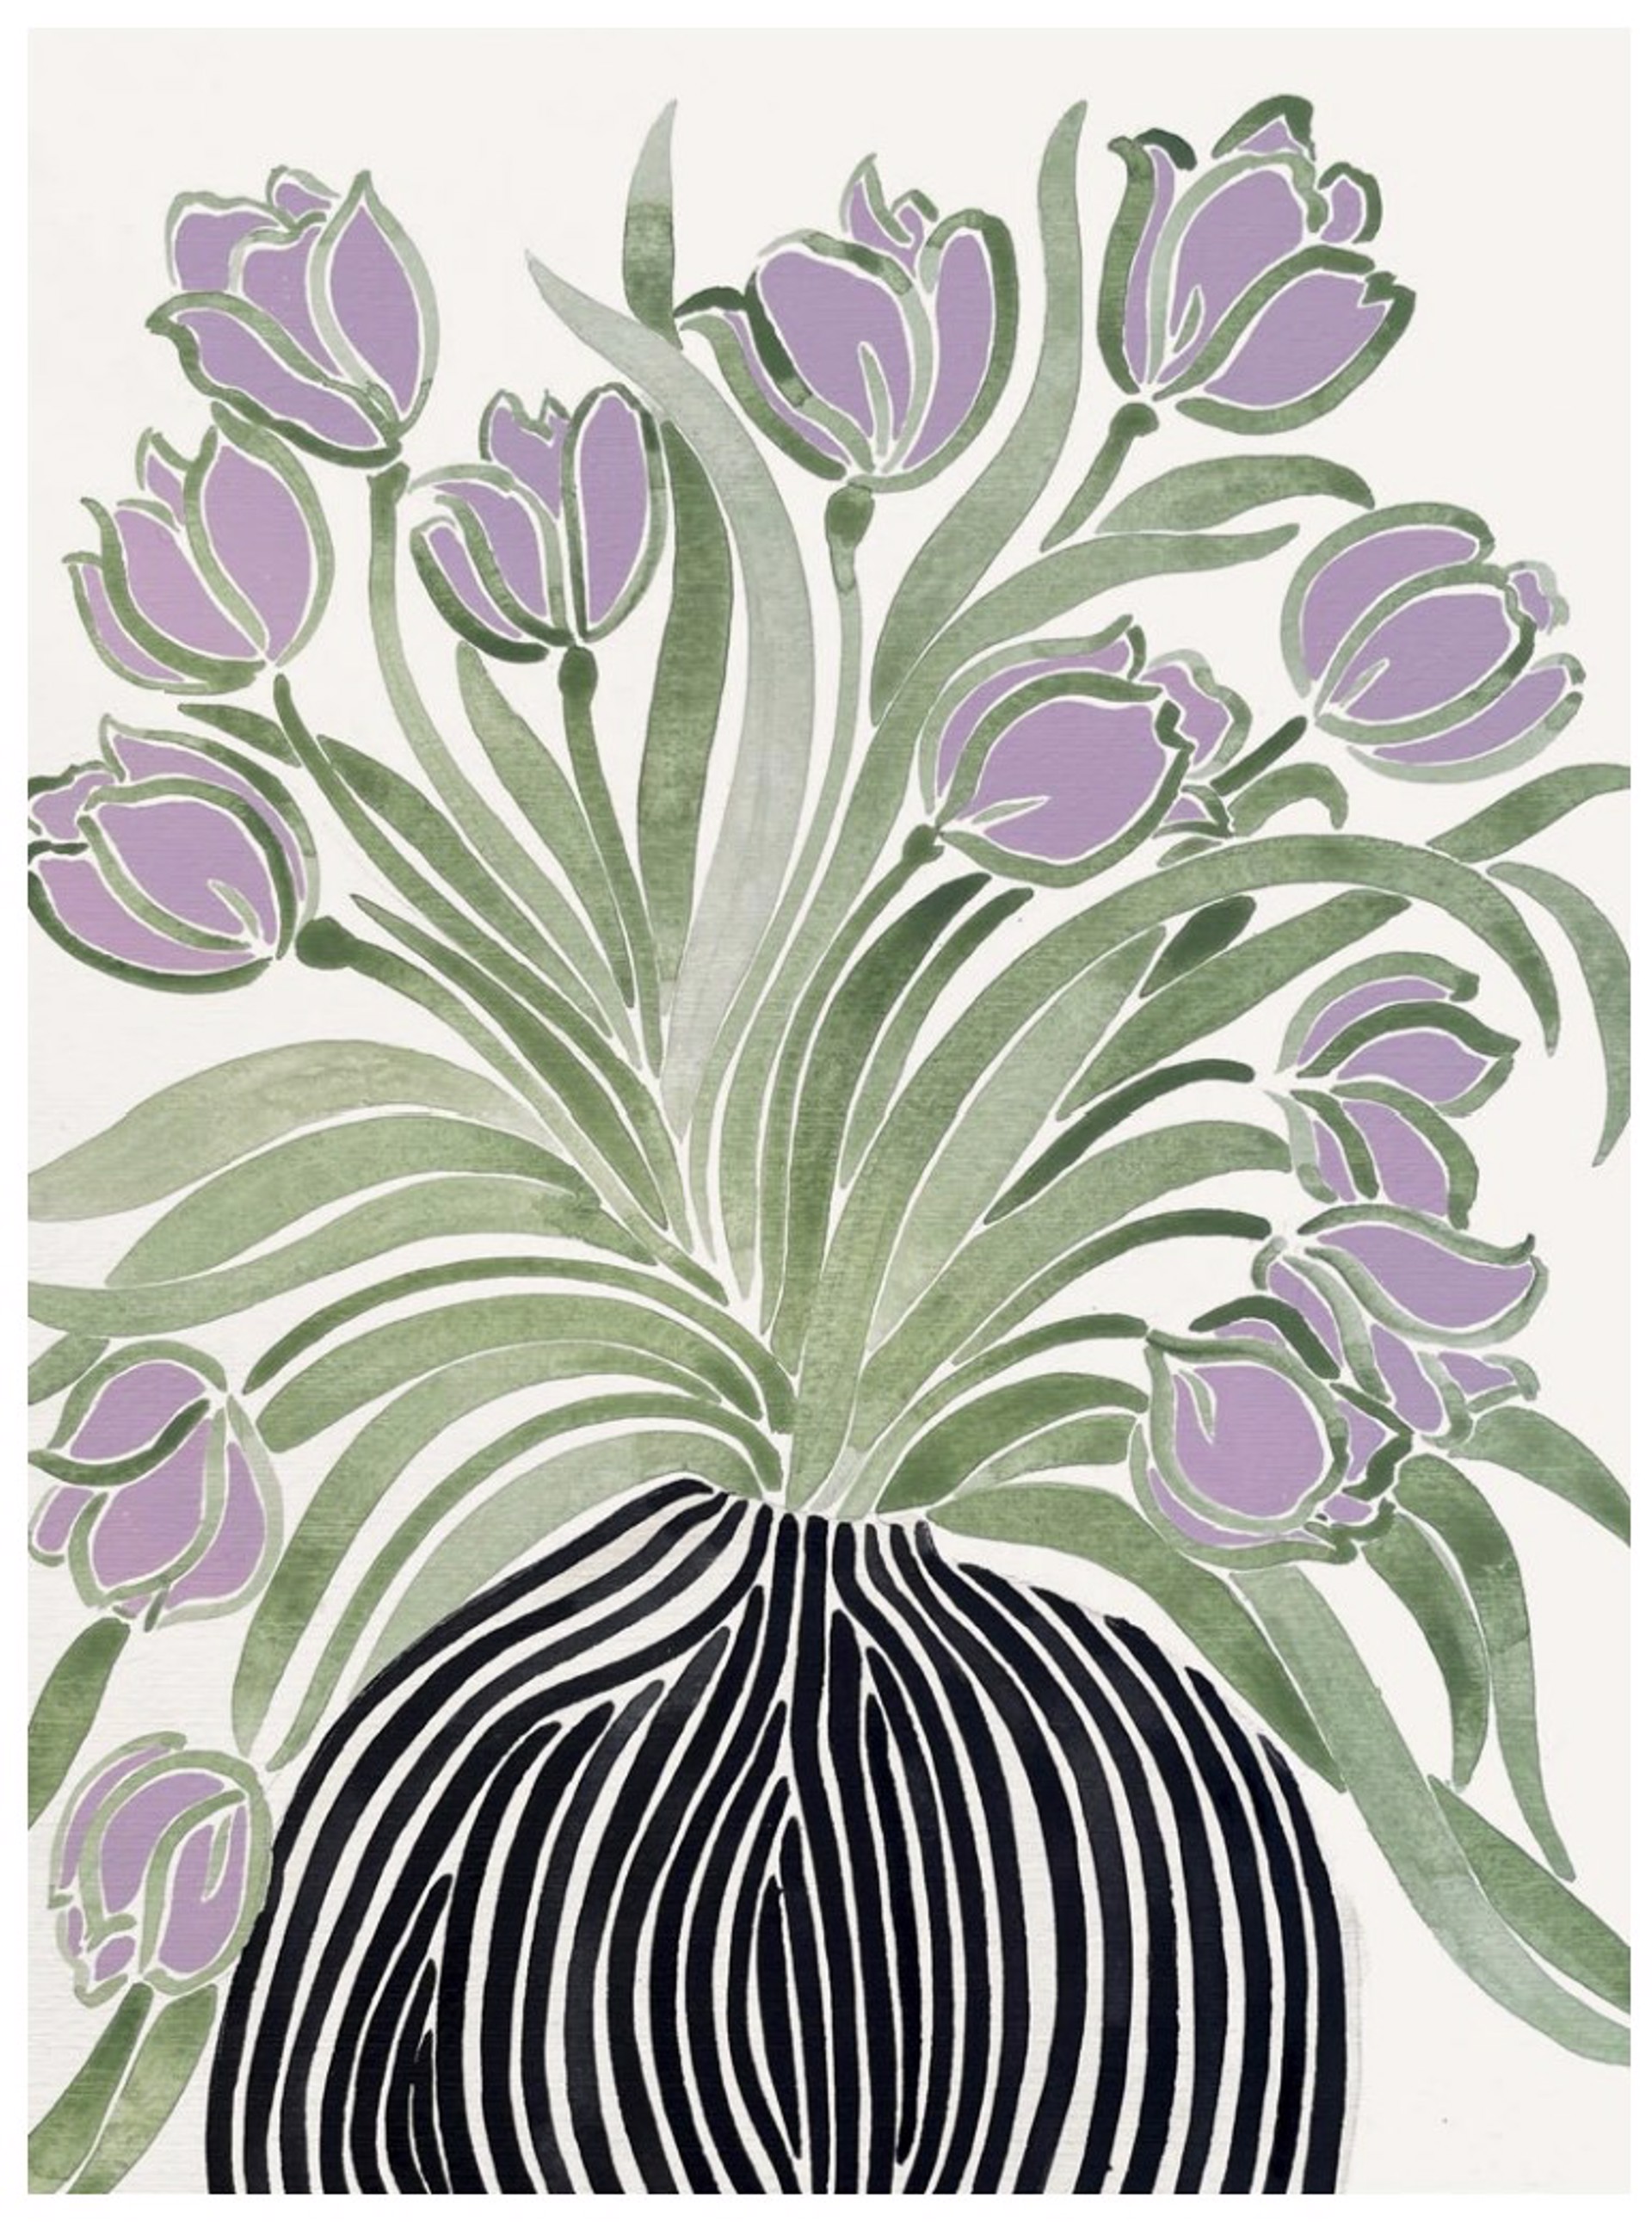 Tulips I by Anine Cecilie Iversen